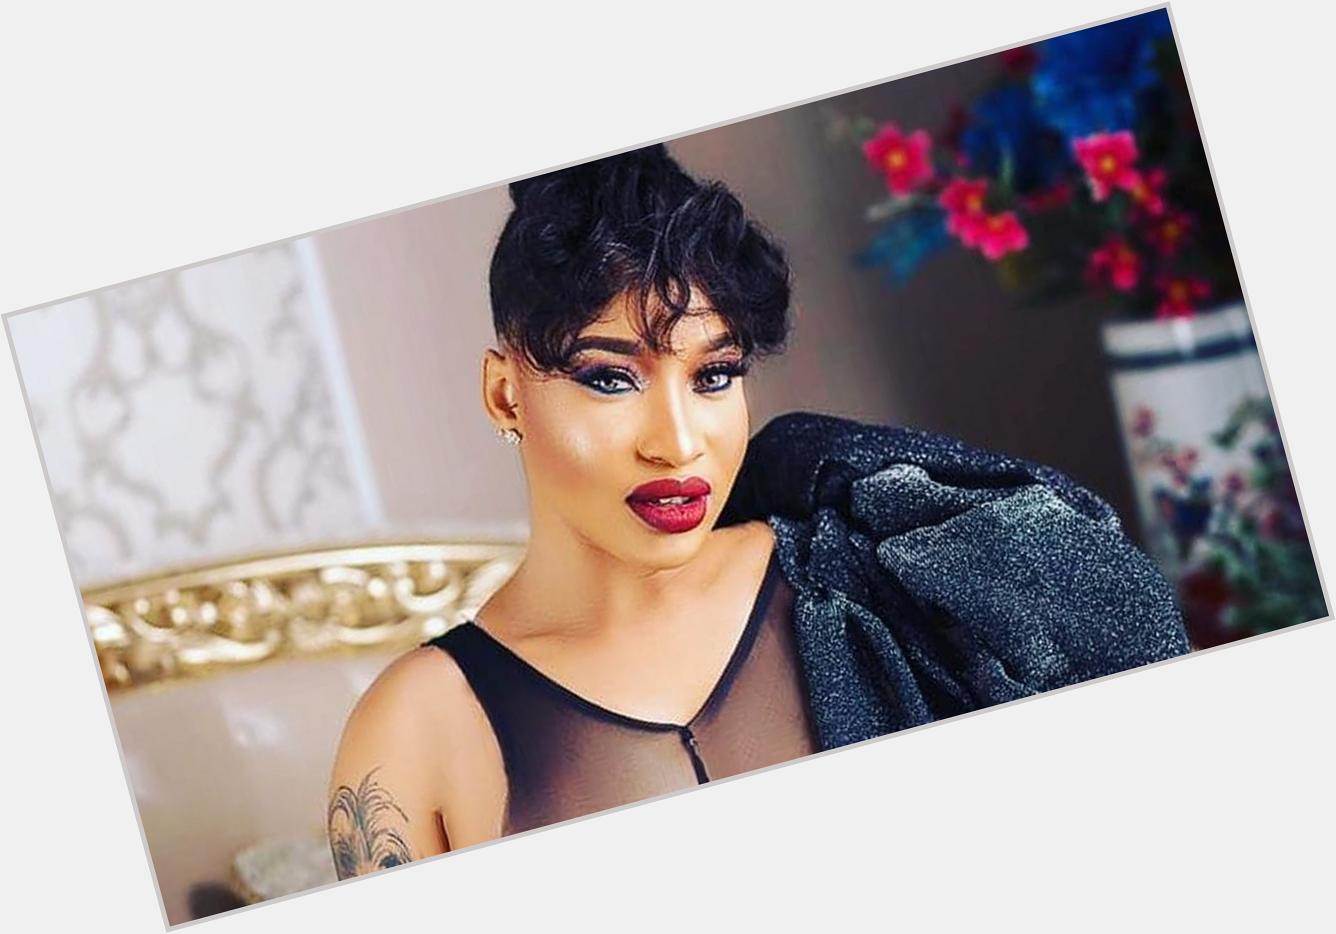 Happy Birthday to Nollywood Actress, Tonto Dikeh
Sending Love and Light your way! 